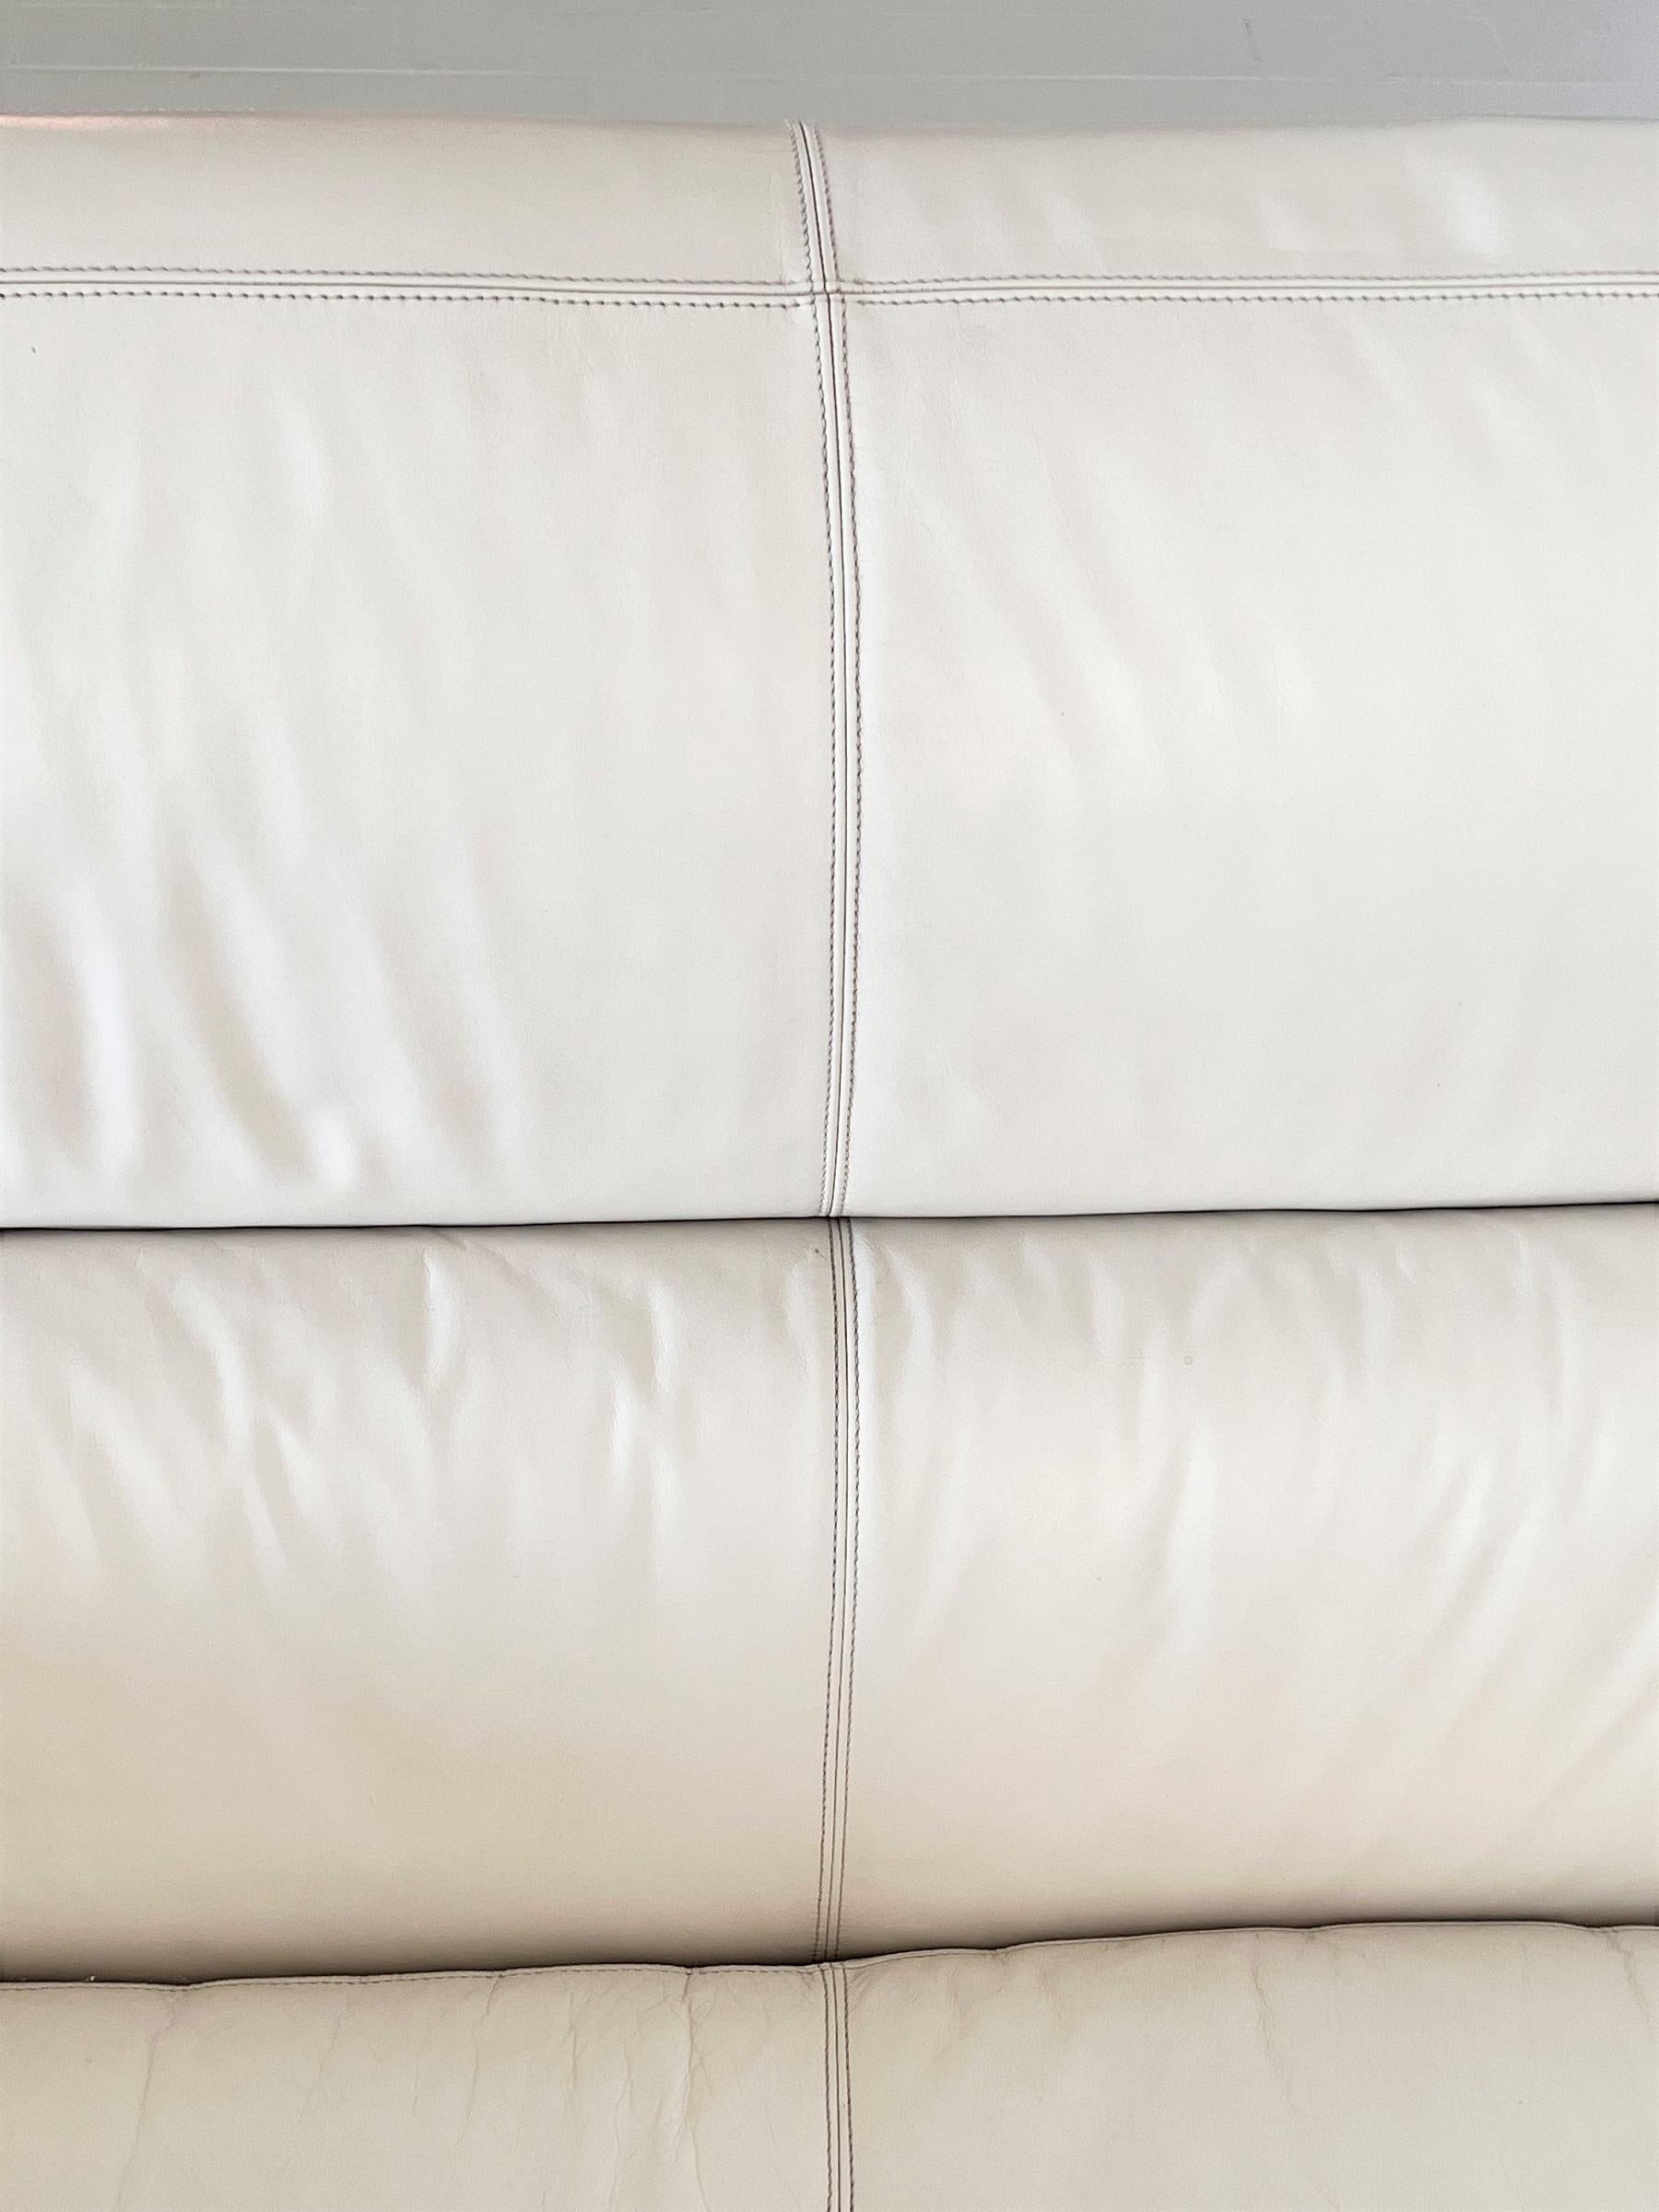 Lacquered Cini Boeri for Knoll Two Seater Sofa 'Brigadier' in White Leather, 1970s